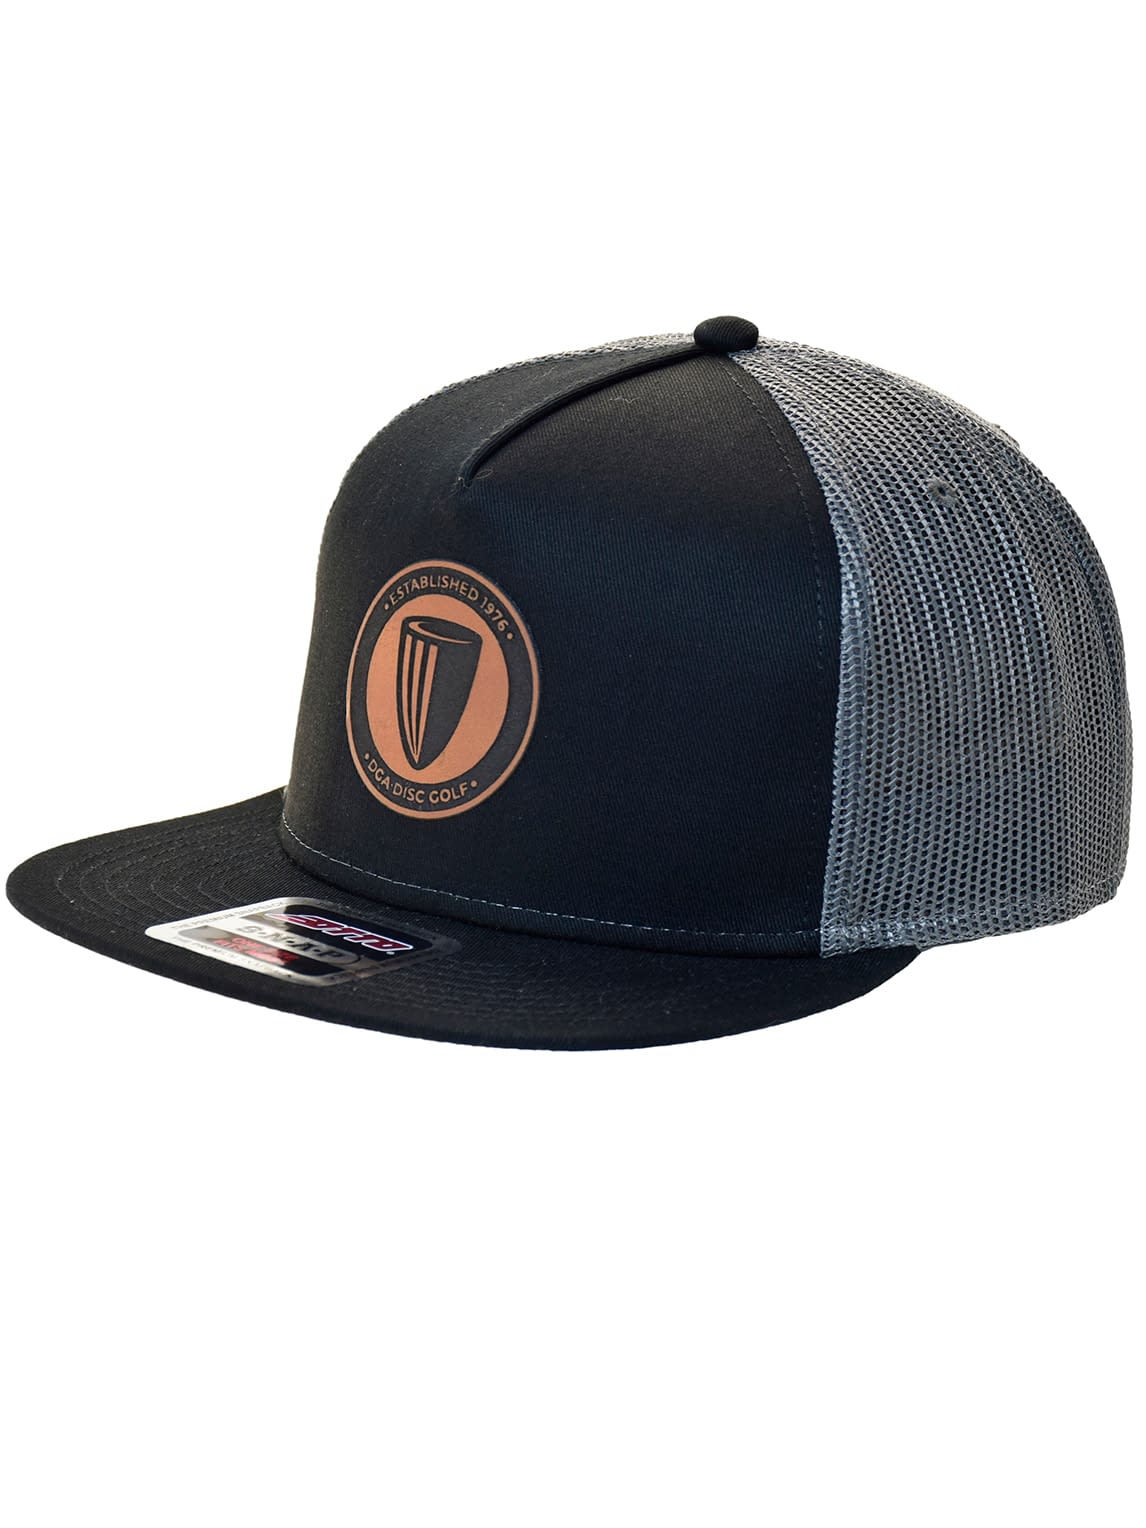 DGA Leather Patch Flat Bill Mesh Snap Back